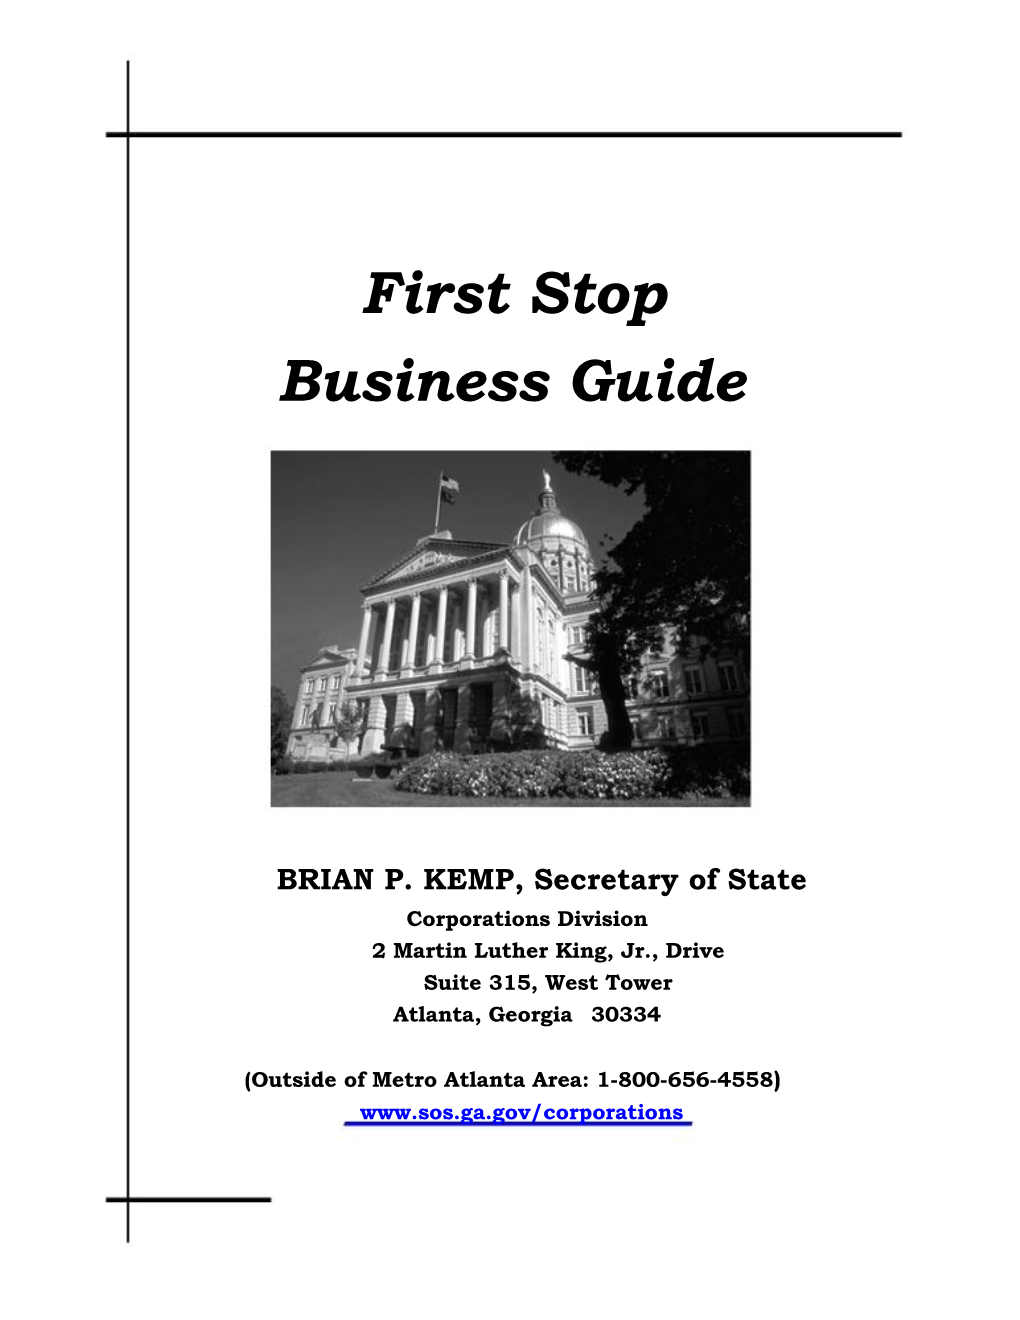 First Stop Business Guide